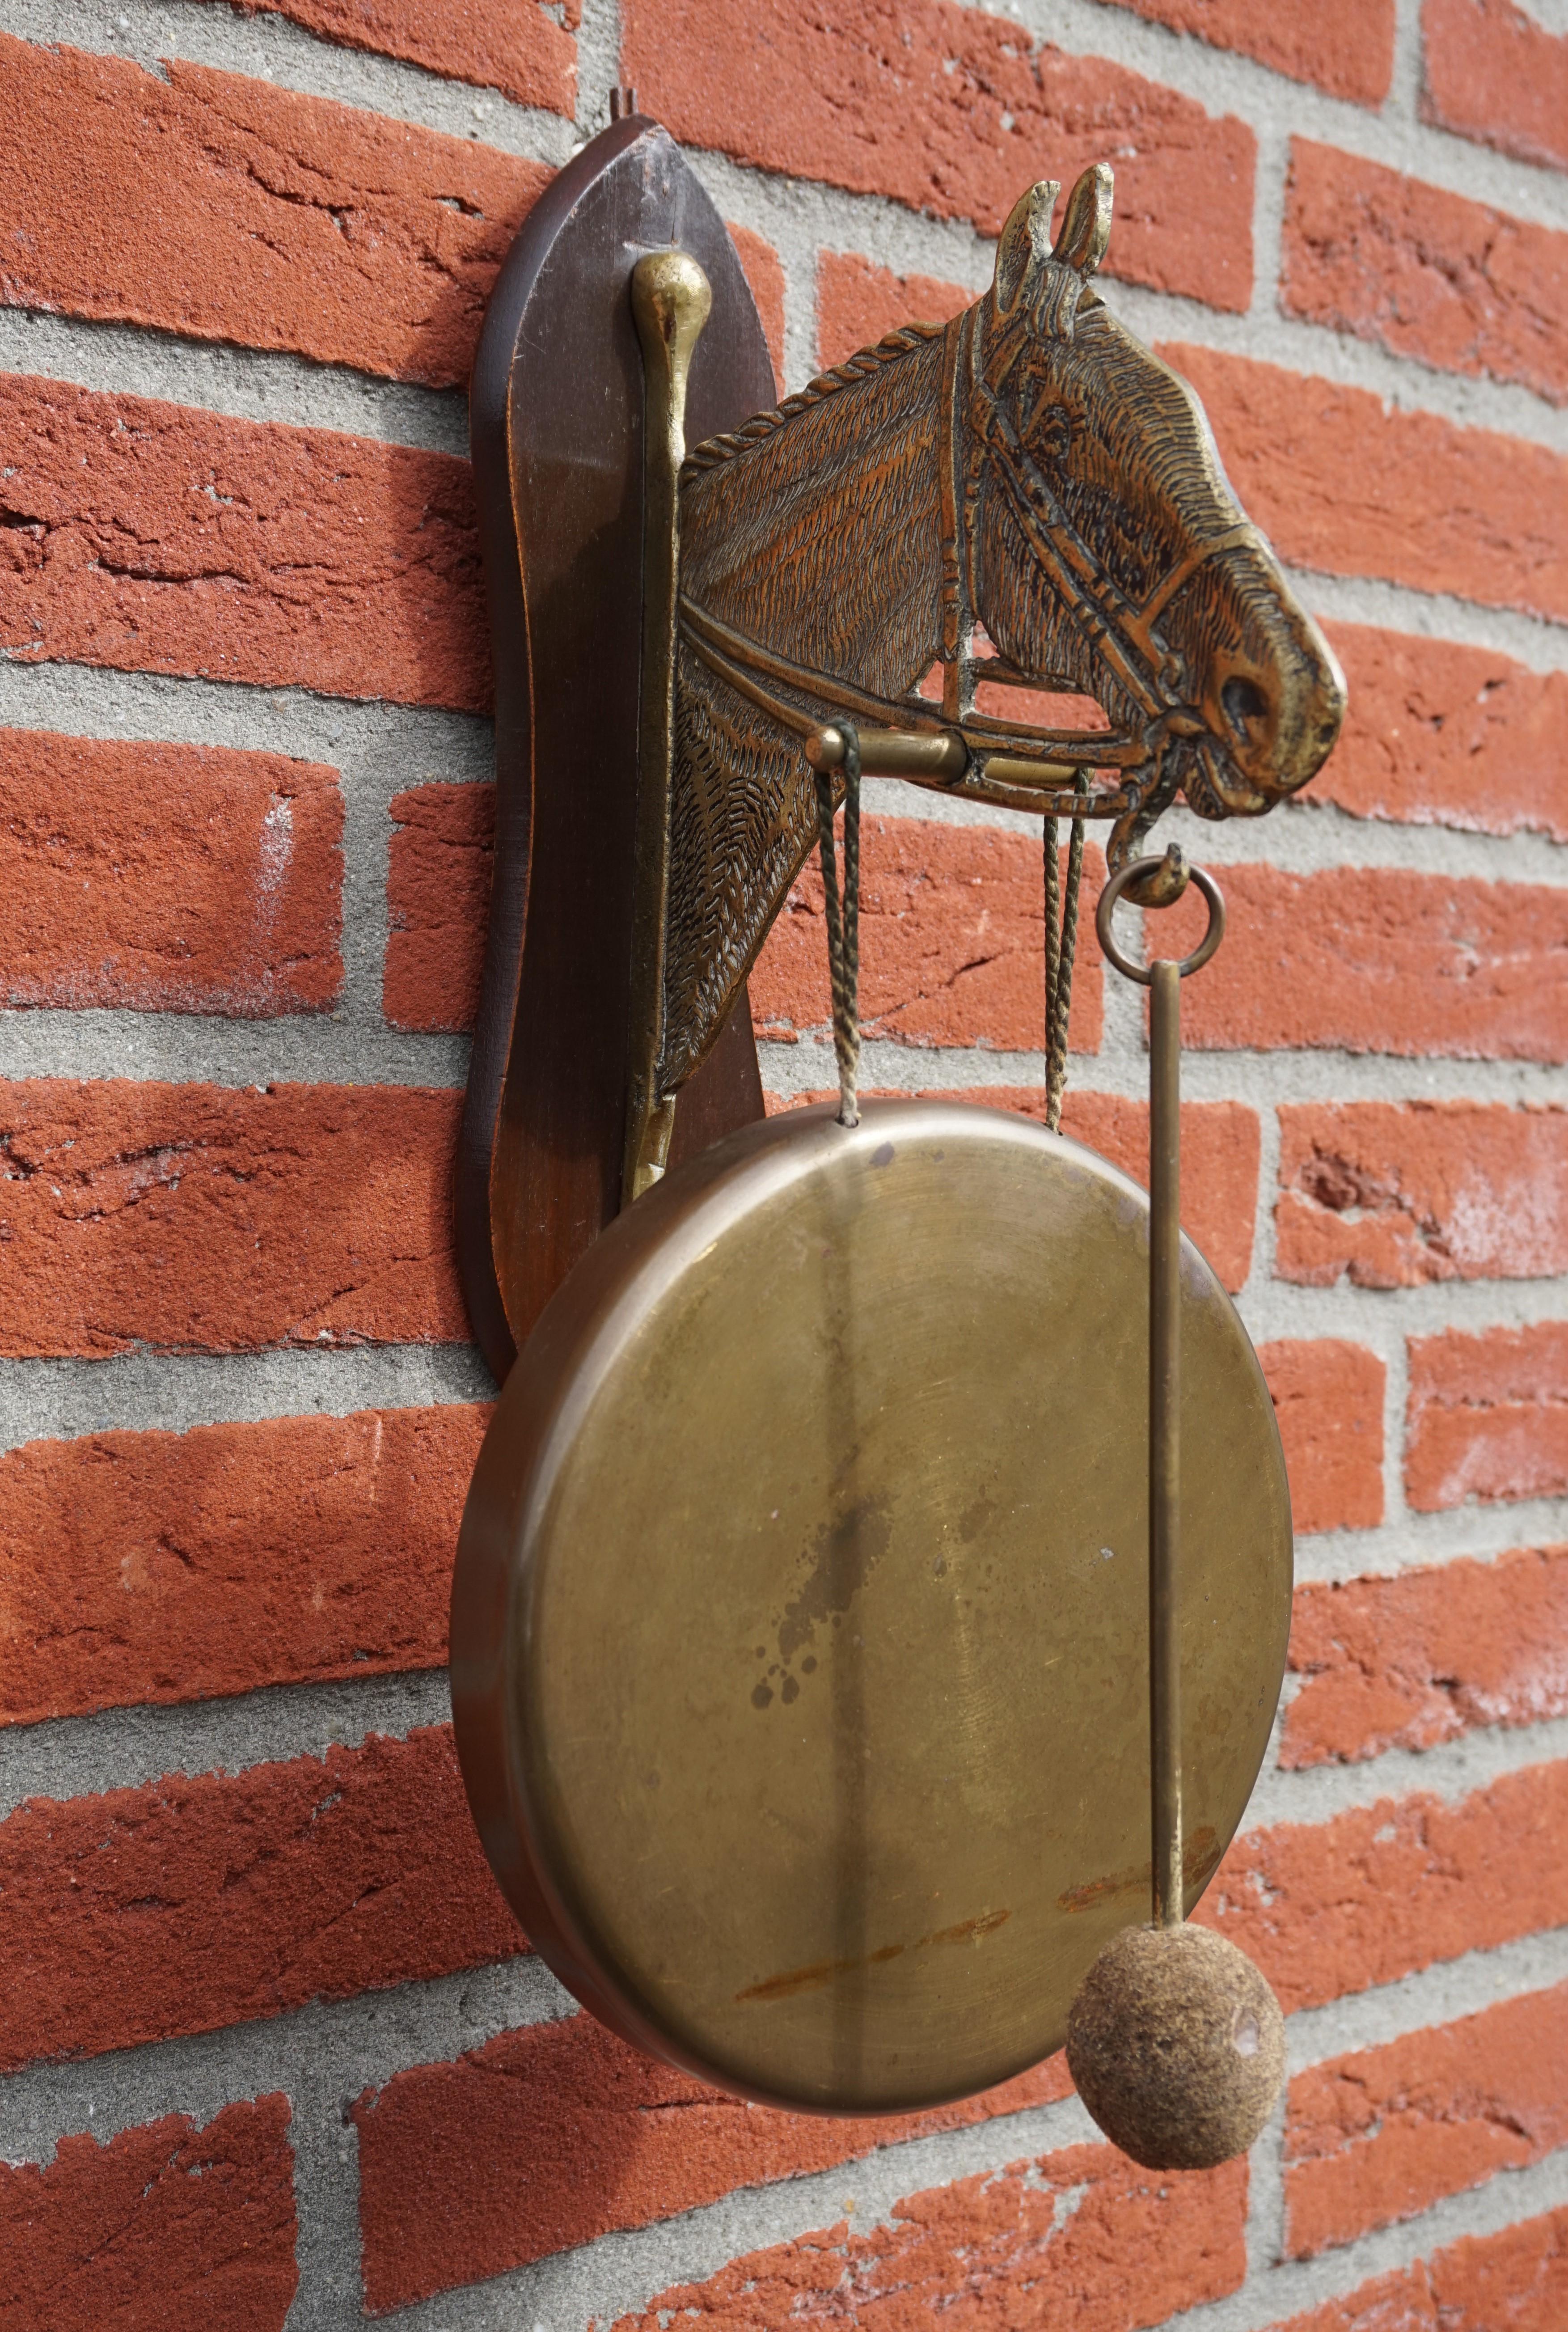 Very rare and striking (pun intended) Arts & Crafts gong.

This totally original house gong with a horse sculpture even comes with the original and working condition striker. The beautifully handcrafted horse and gong are a real joy to look at and